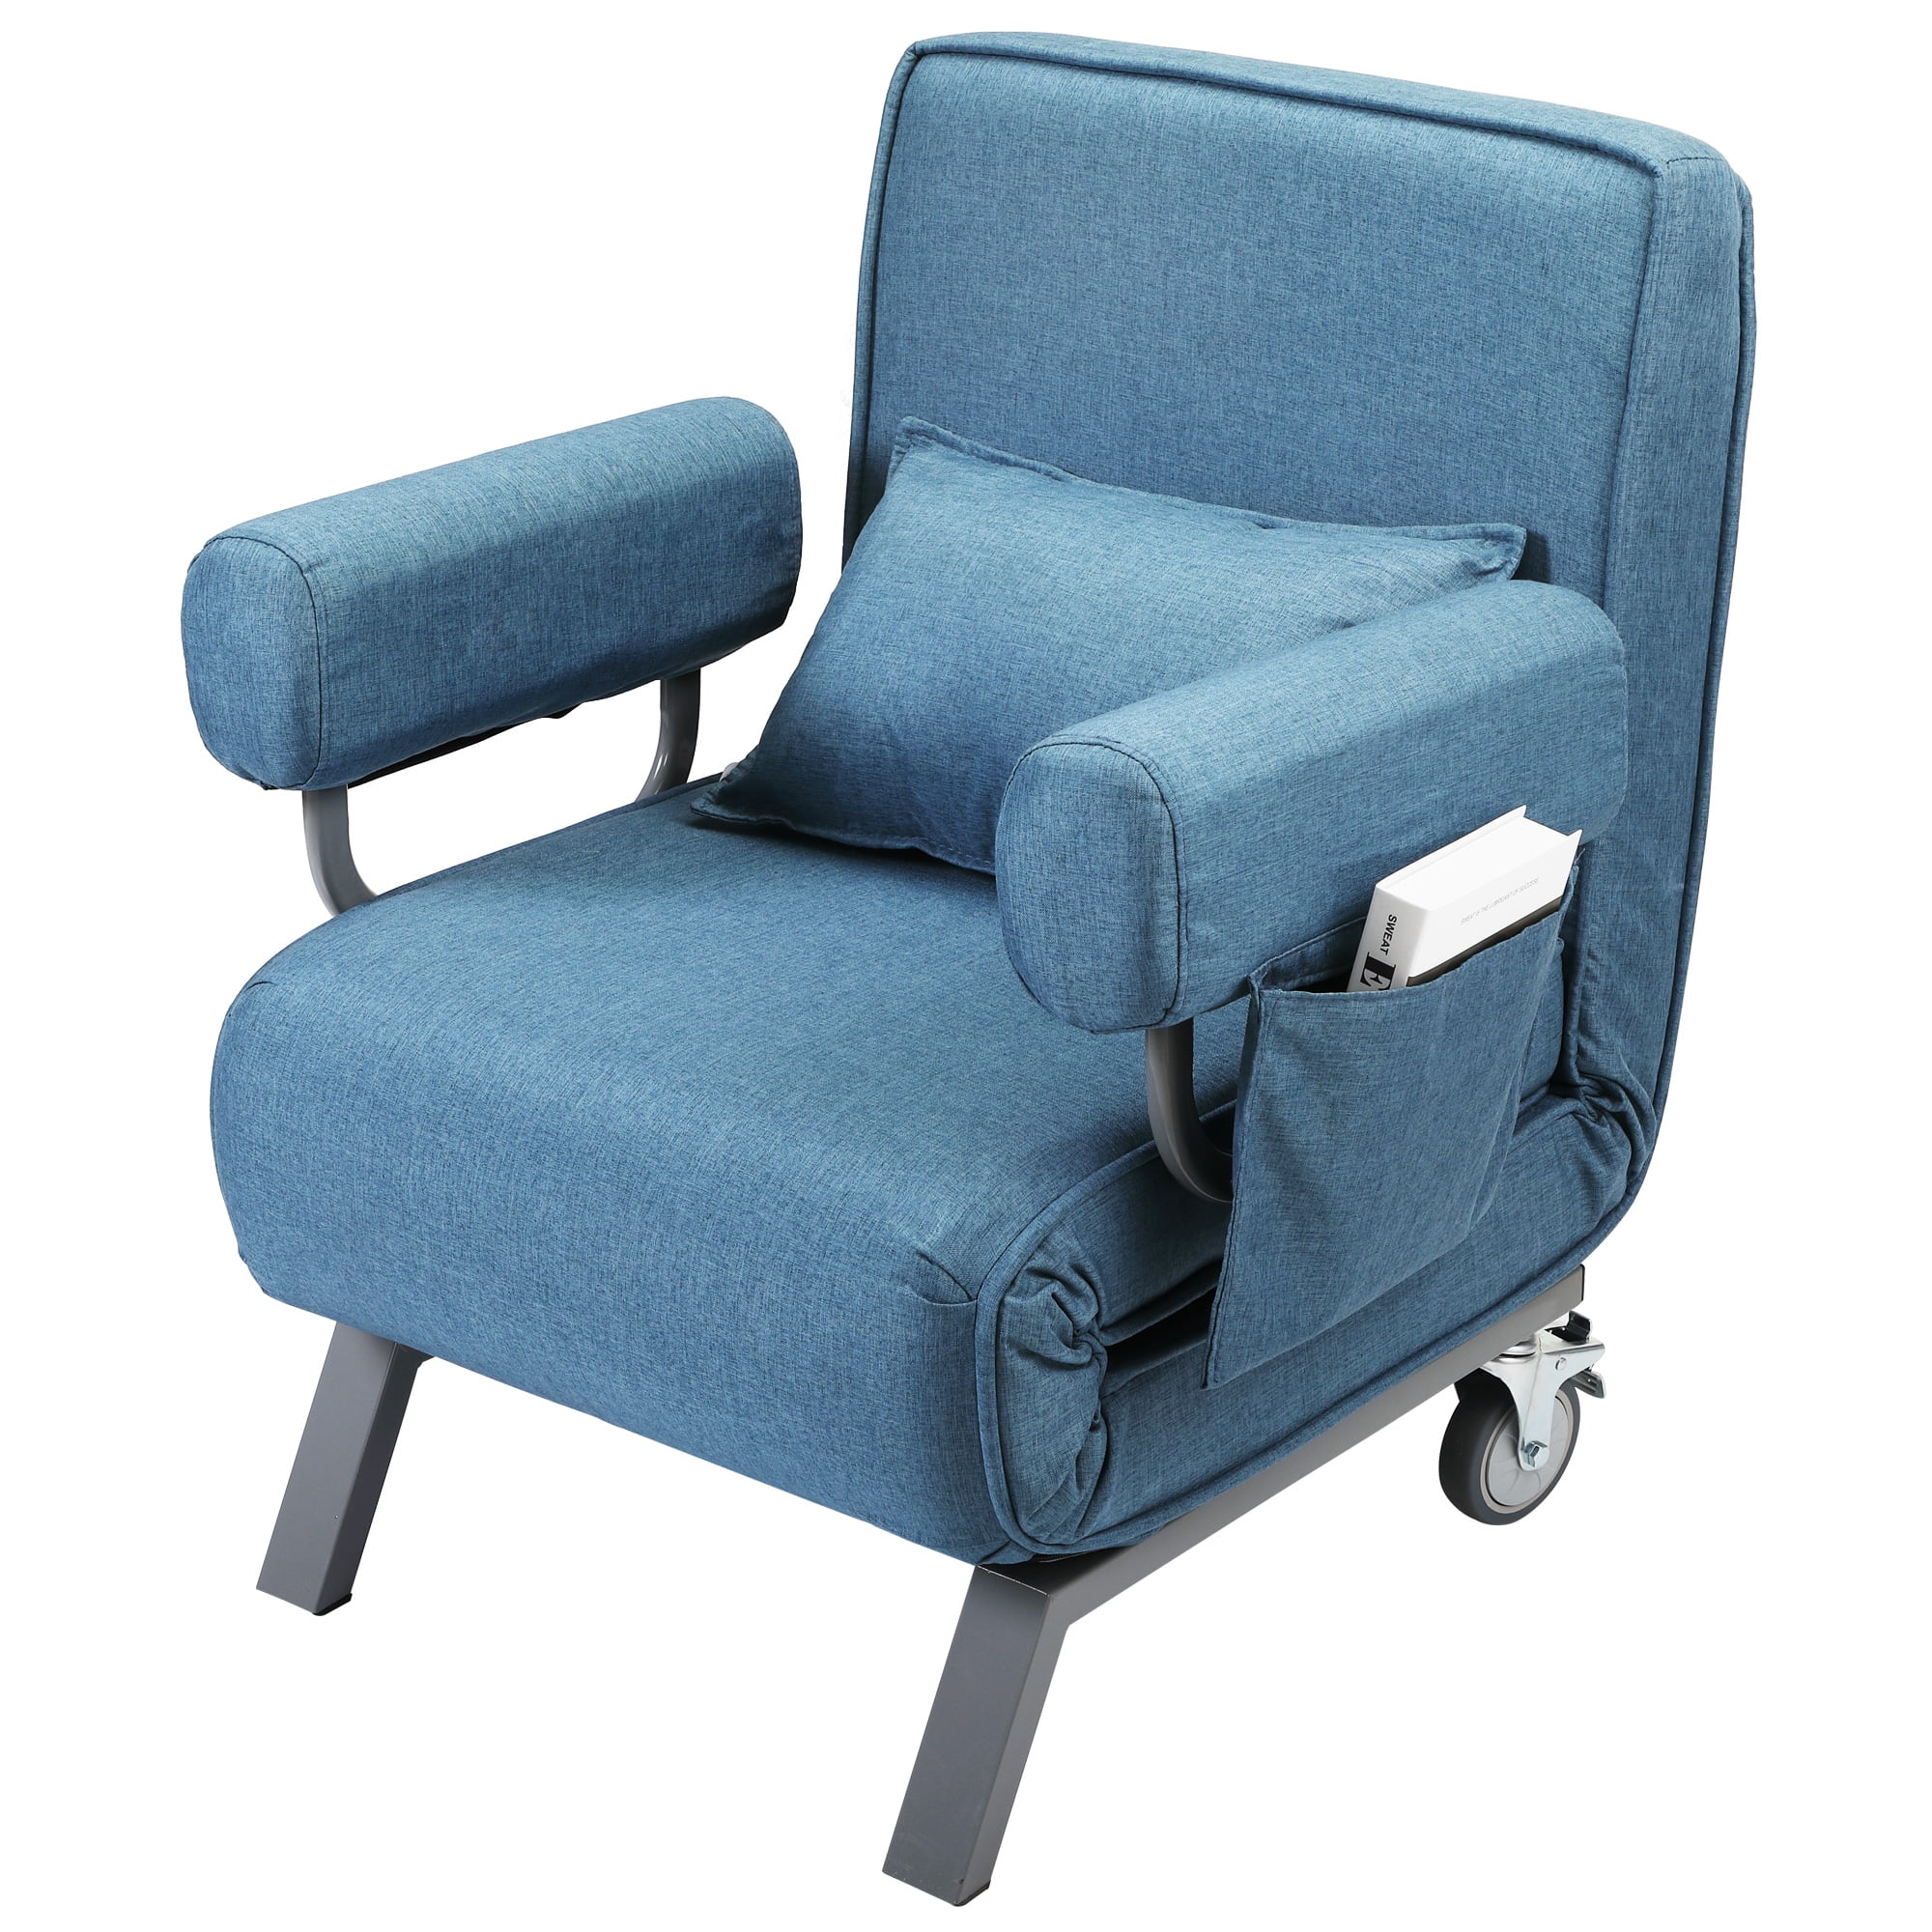 Jaxpety Convertible Chair Blue, Costway Convertible Sofa Bed Folding Arm Chair Sleeper